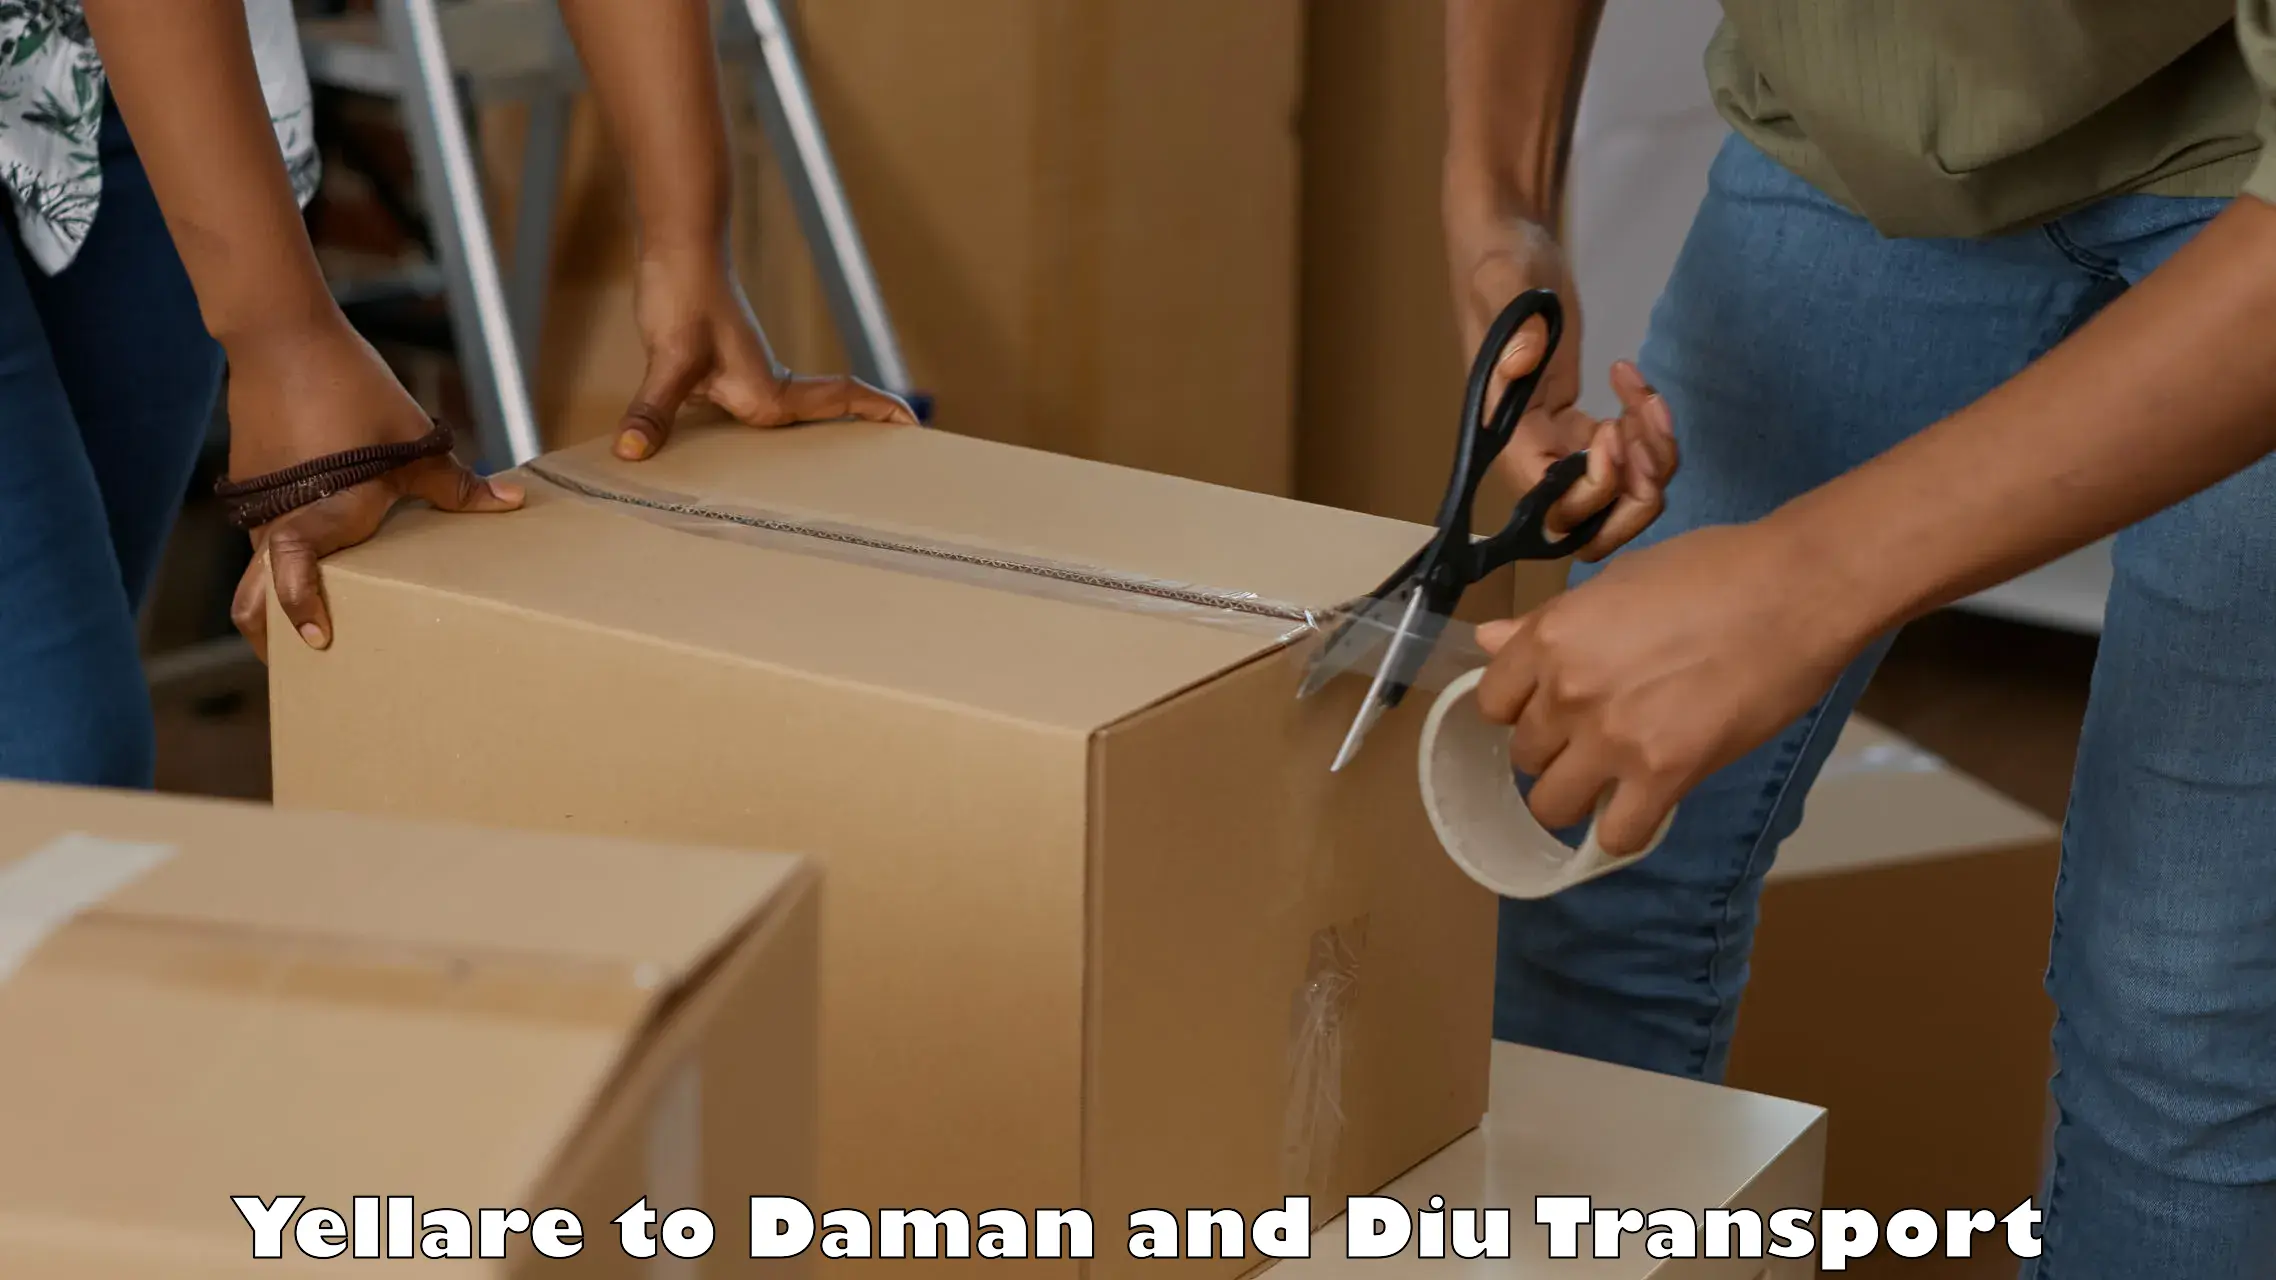 Interstate transport services Yellare to Daman and Diu